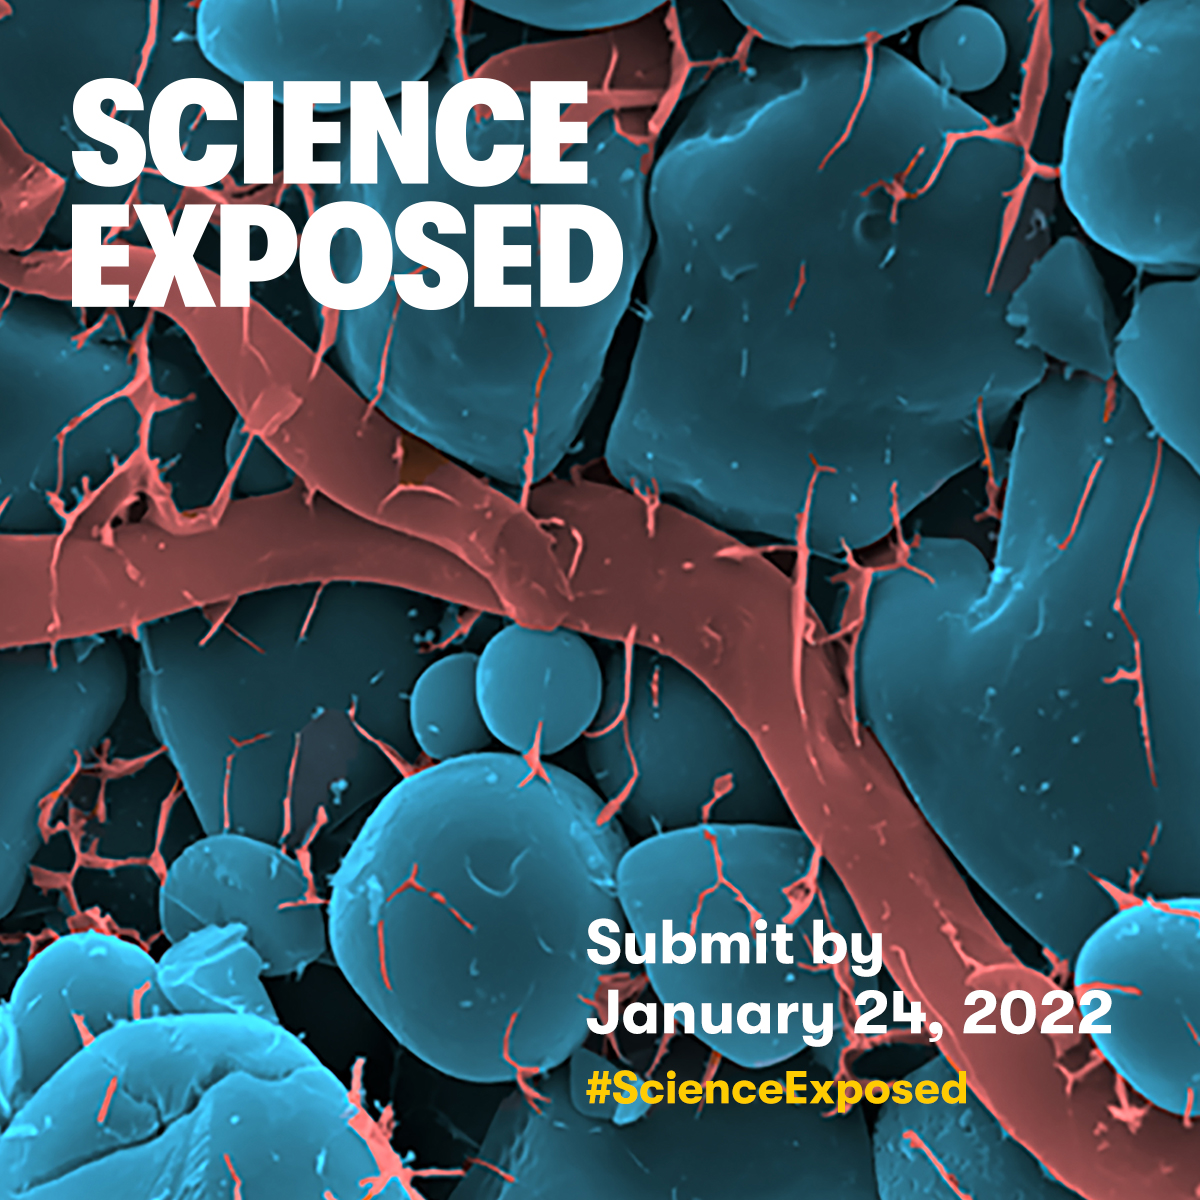 Science Exposed. Submit by January 24, 2022.